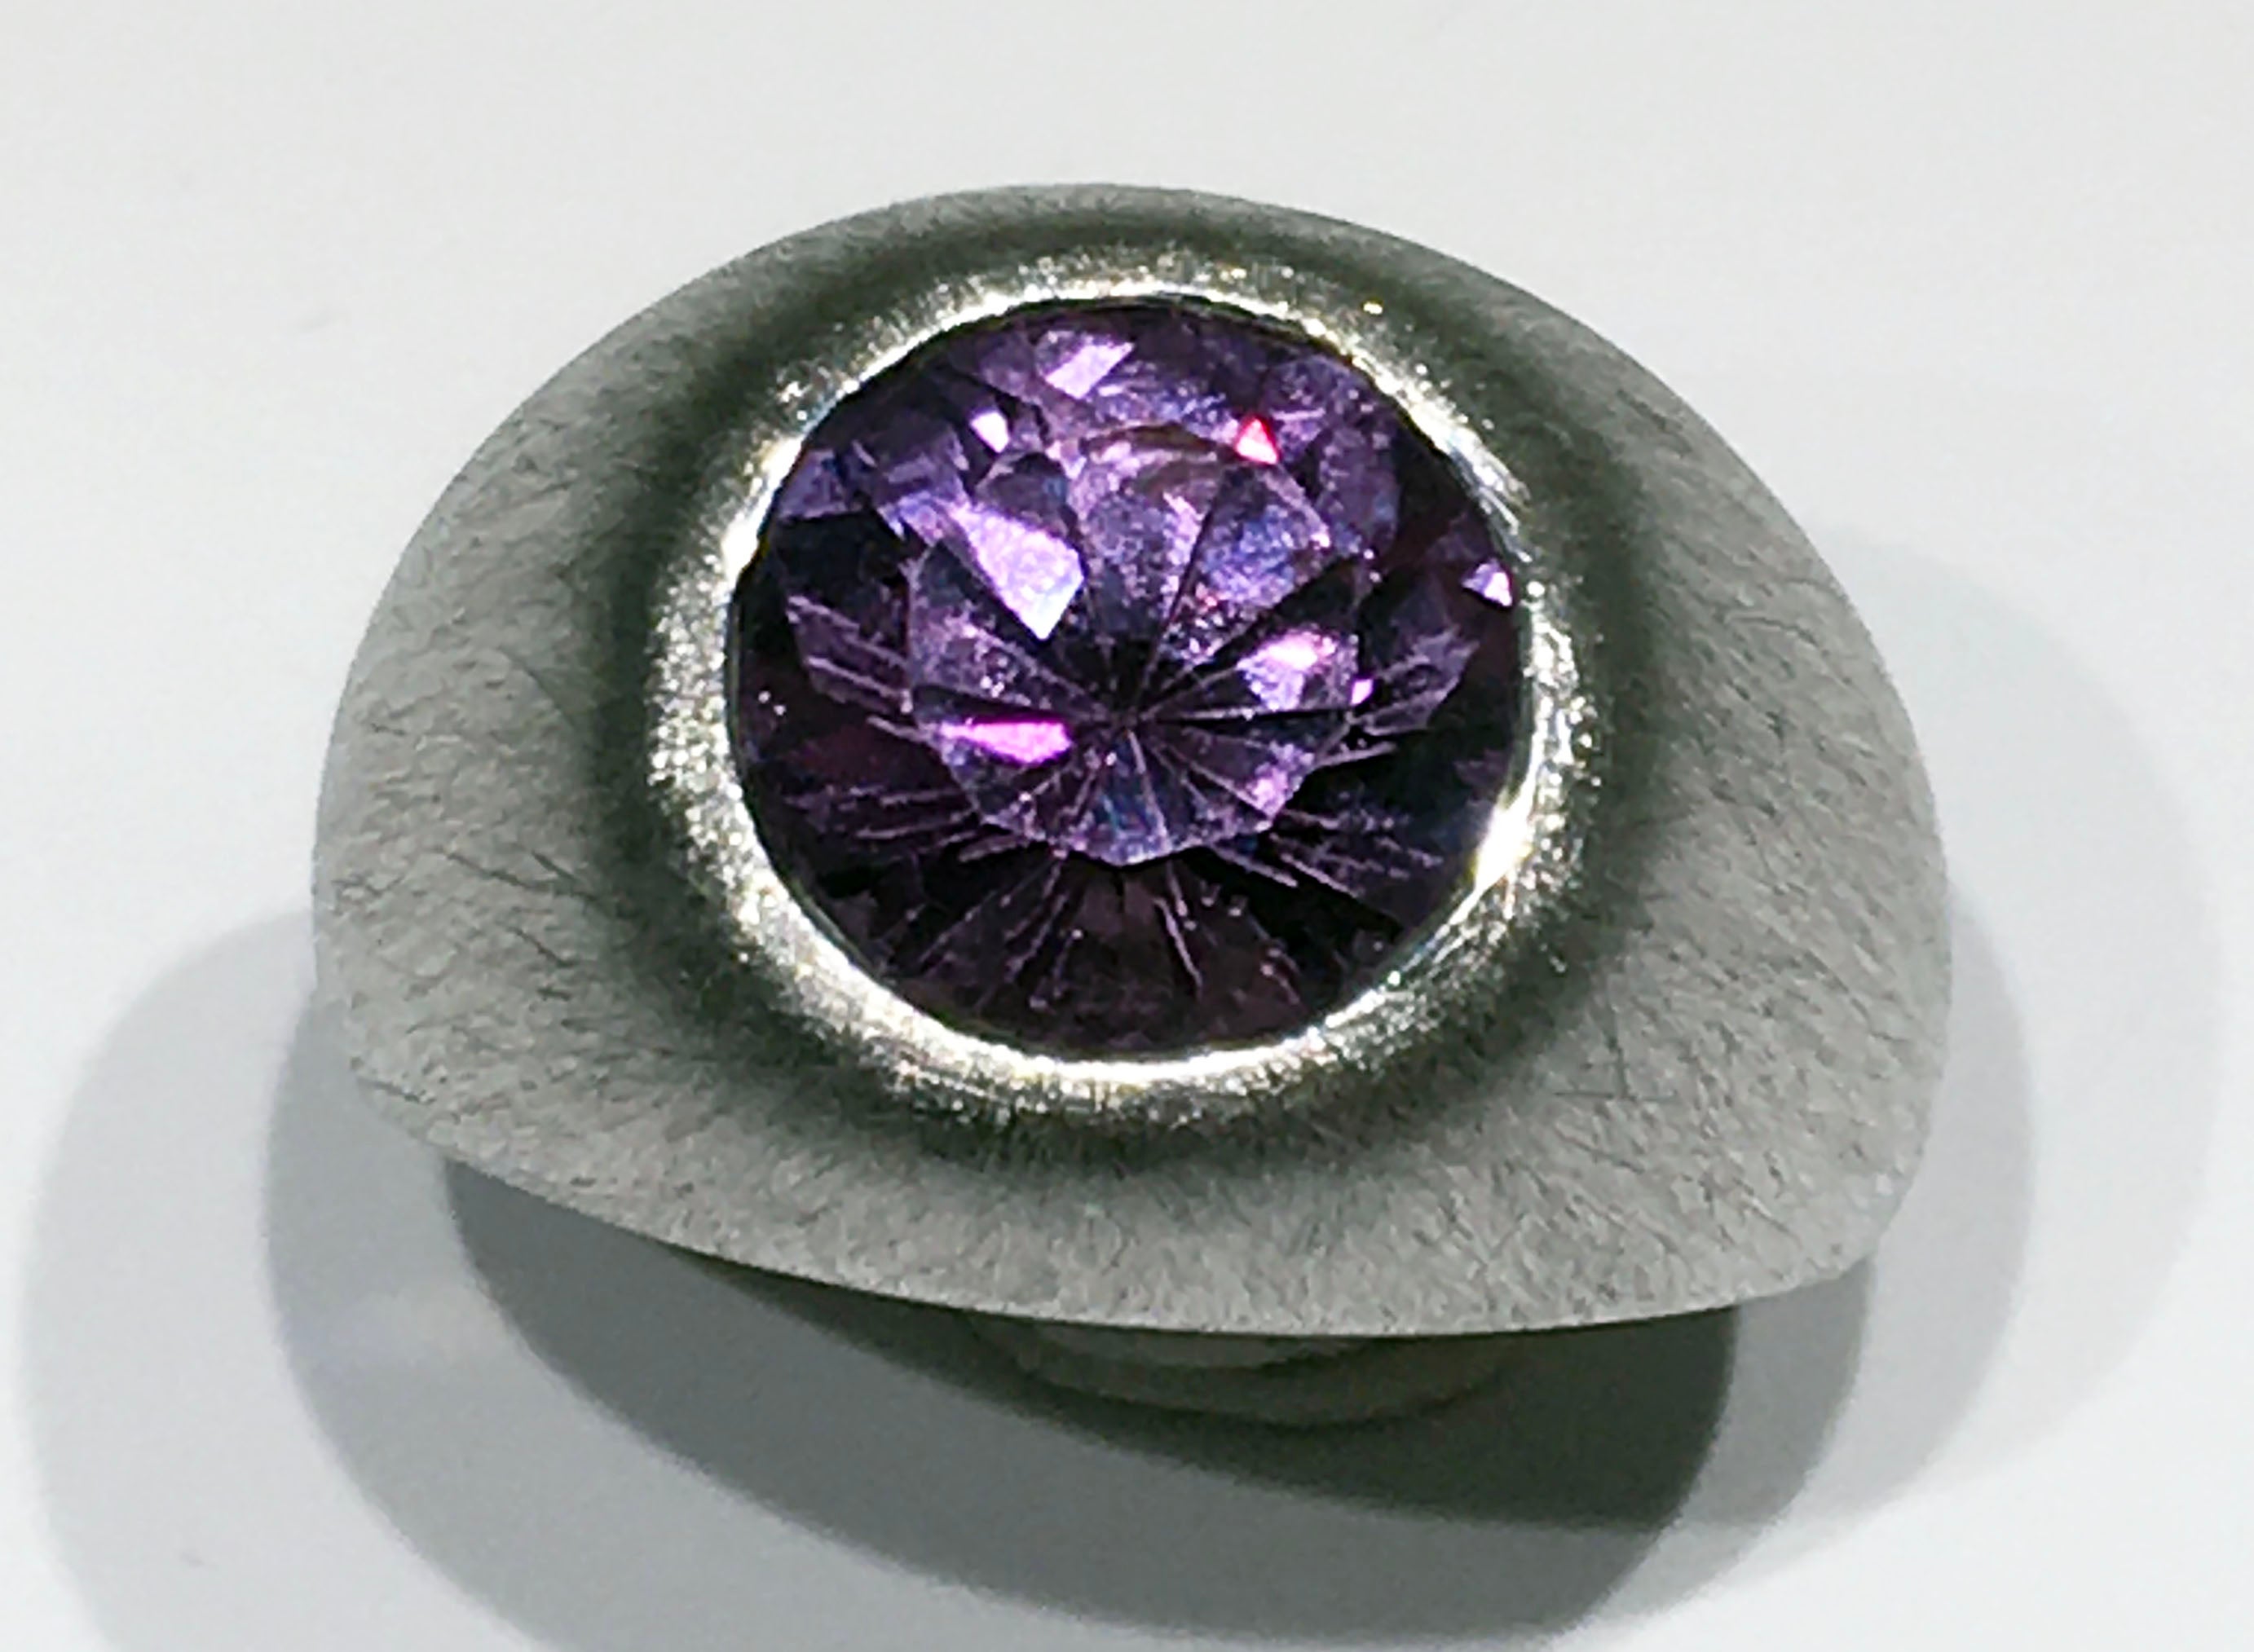 A Brushed Silver Ring with Cultured Color Change Sapphire. Cultured Color Change Round Brilliant Sapphire is 4.8 Carats, Silver weight is 8.5 Grams. Ring size is 7.5 USA

Originally from San Diego, California, Kary Adam lived in the “Gem Capital of